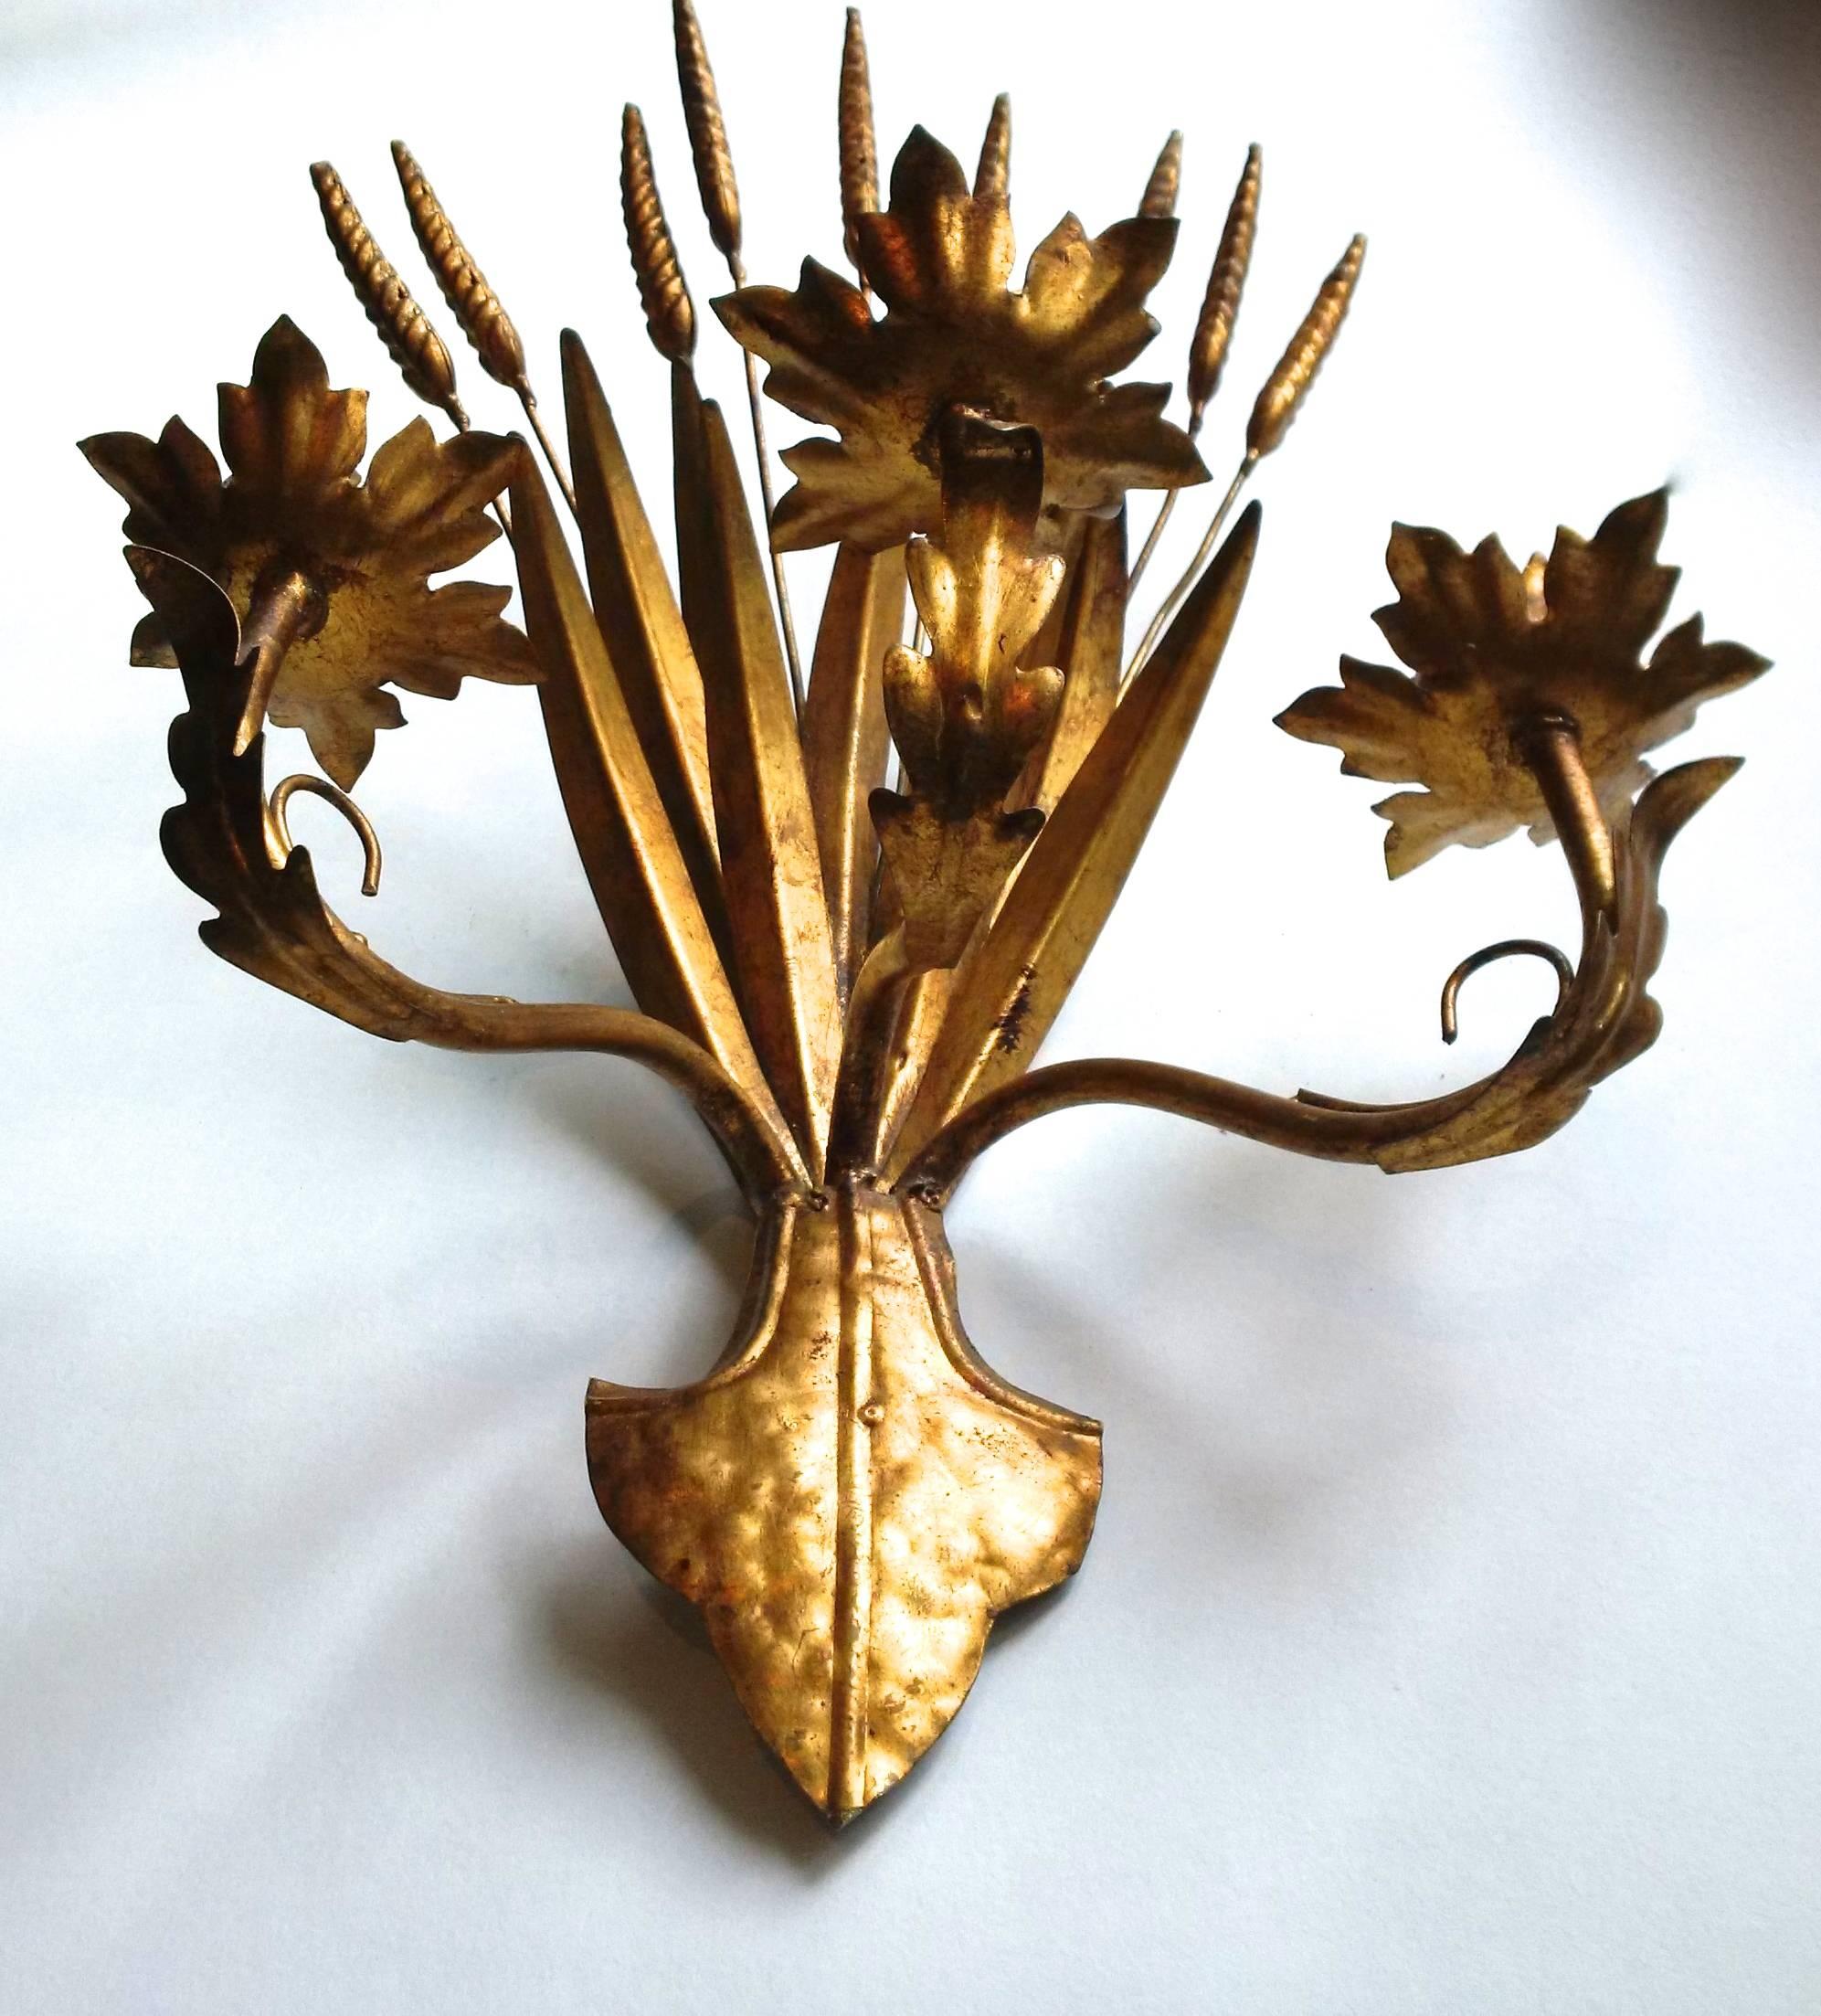 French applique or wall light with two fittings formed like roses and wheat sheaves on top.